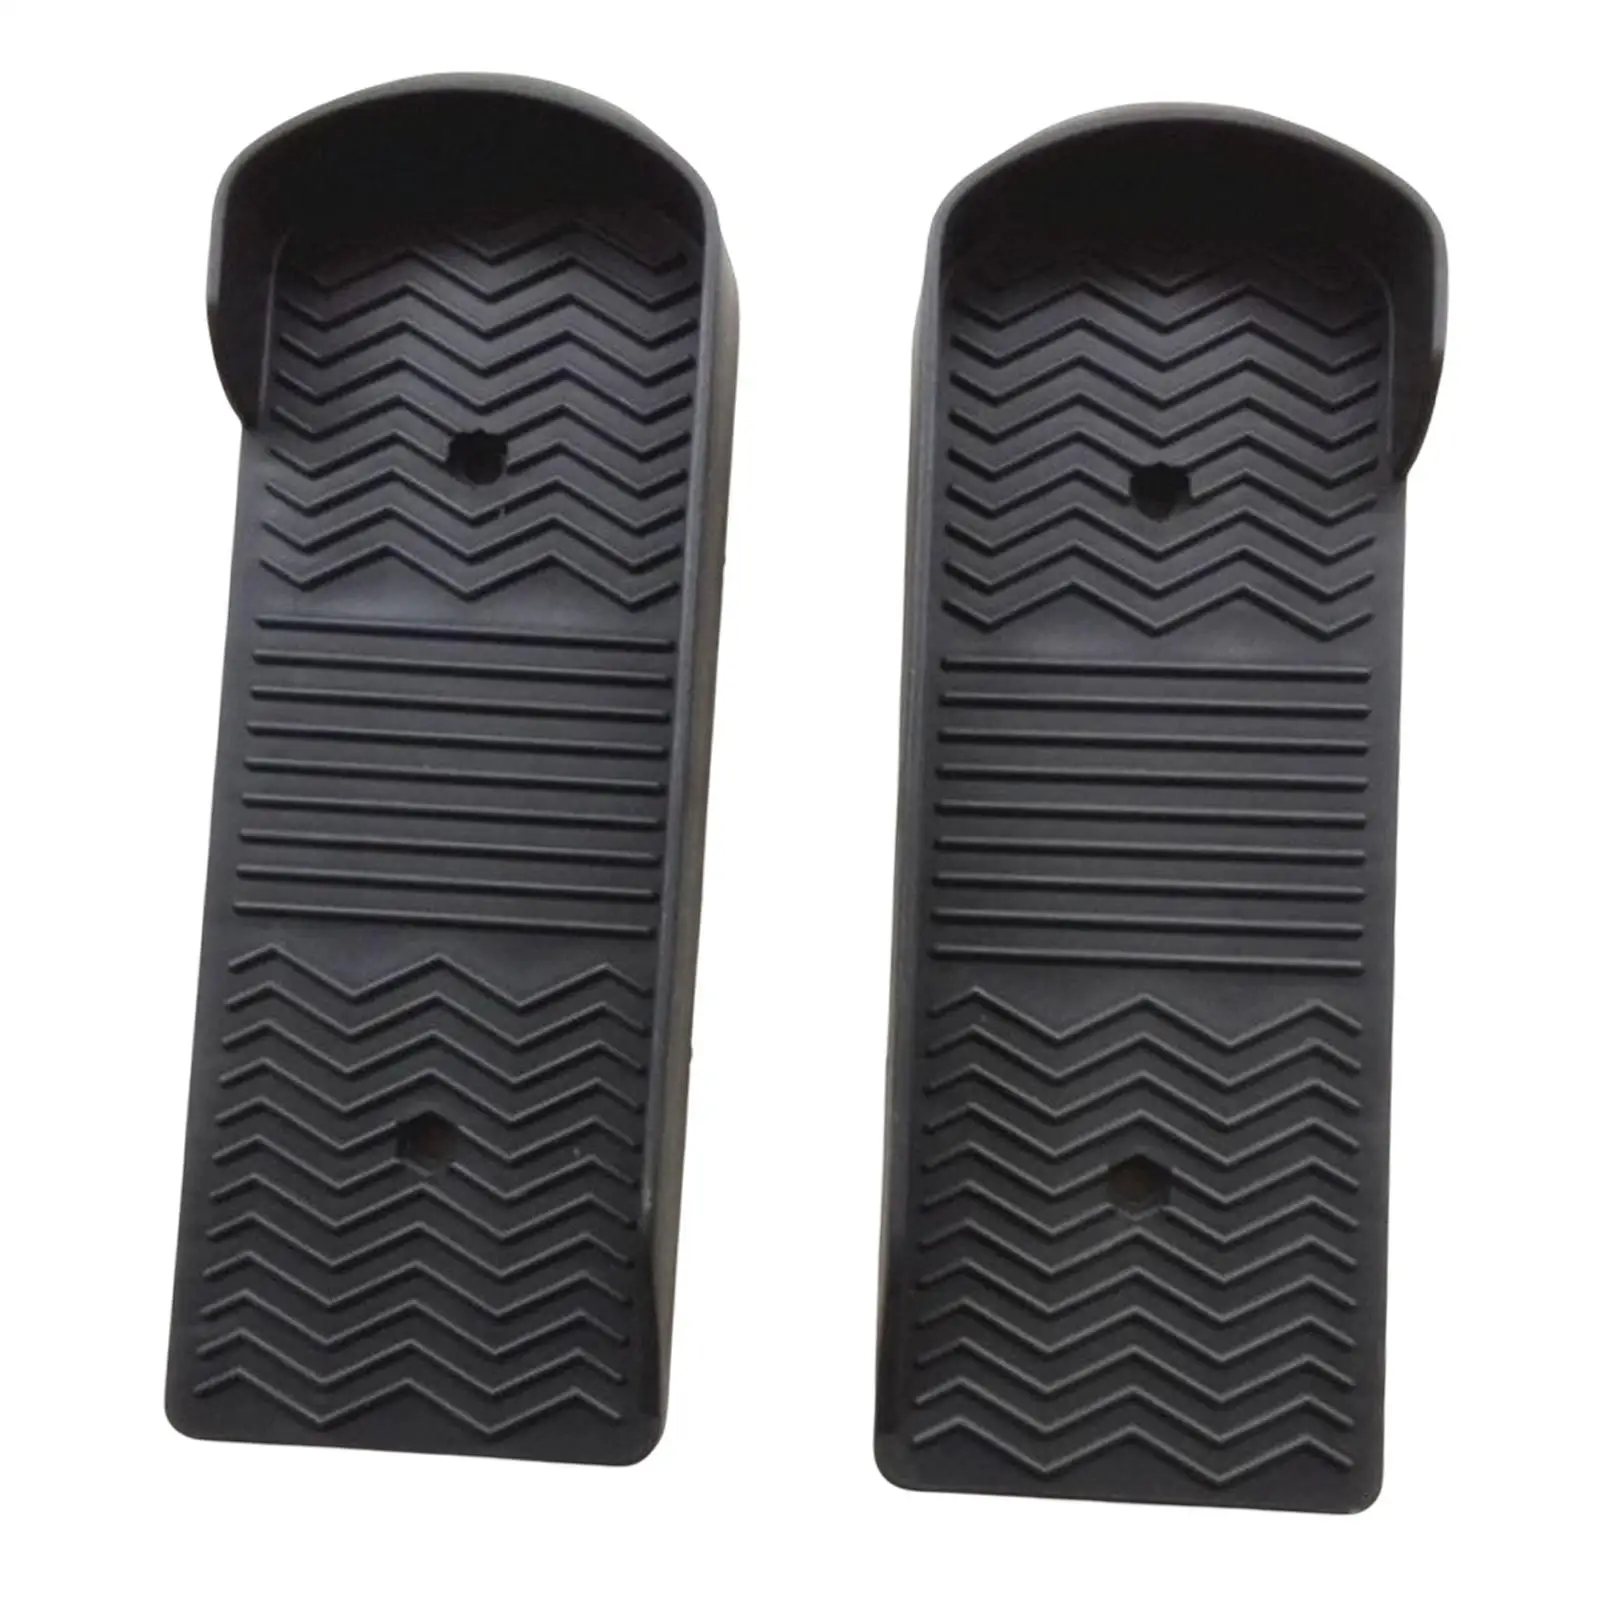 Household Elliptical Machine Foot Pedals Walking Machine Pedals for Home Accessories